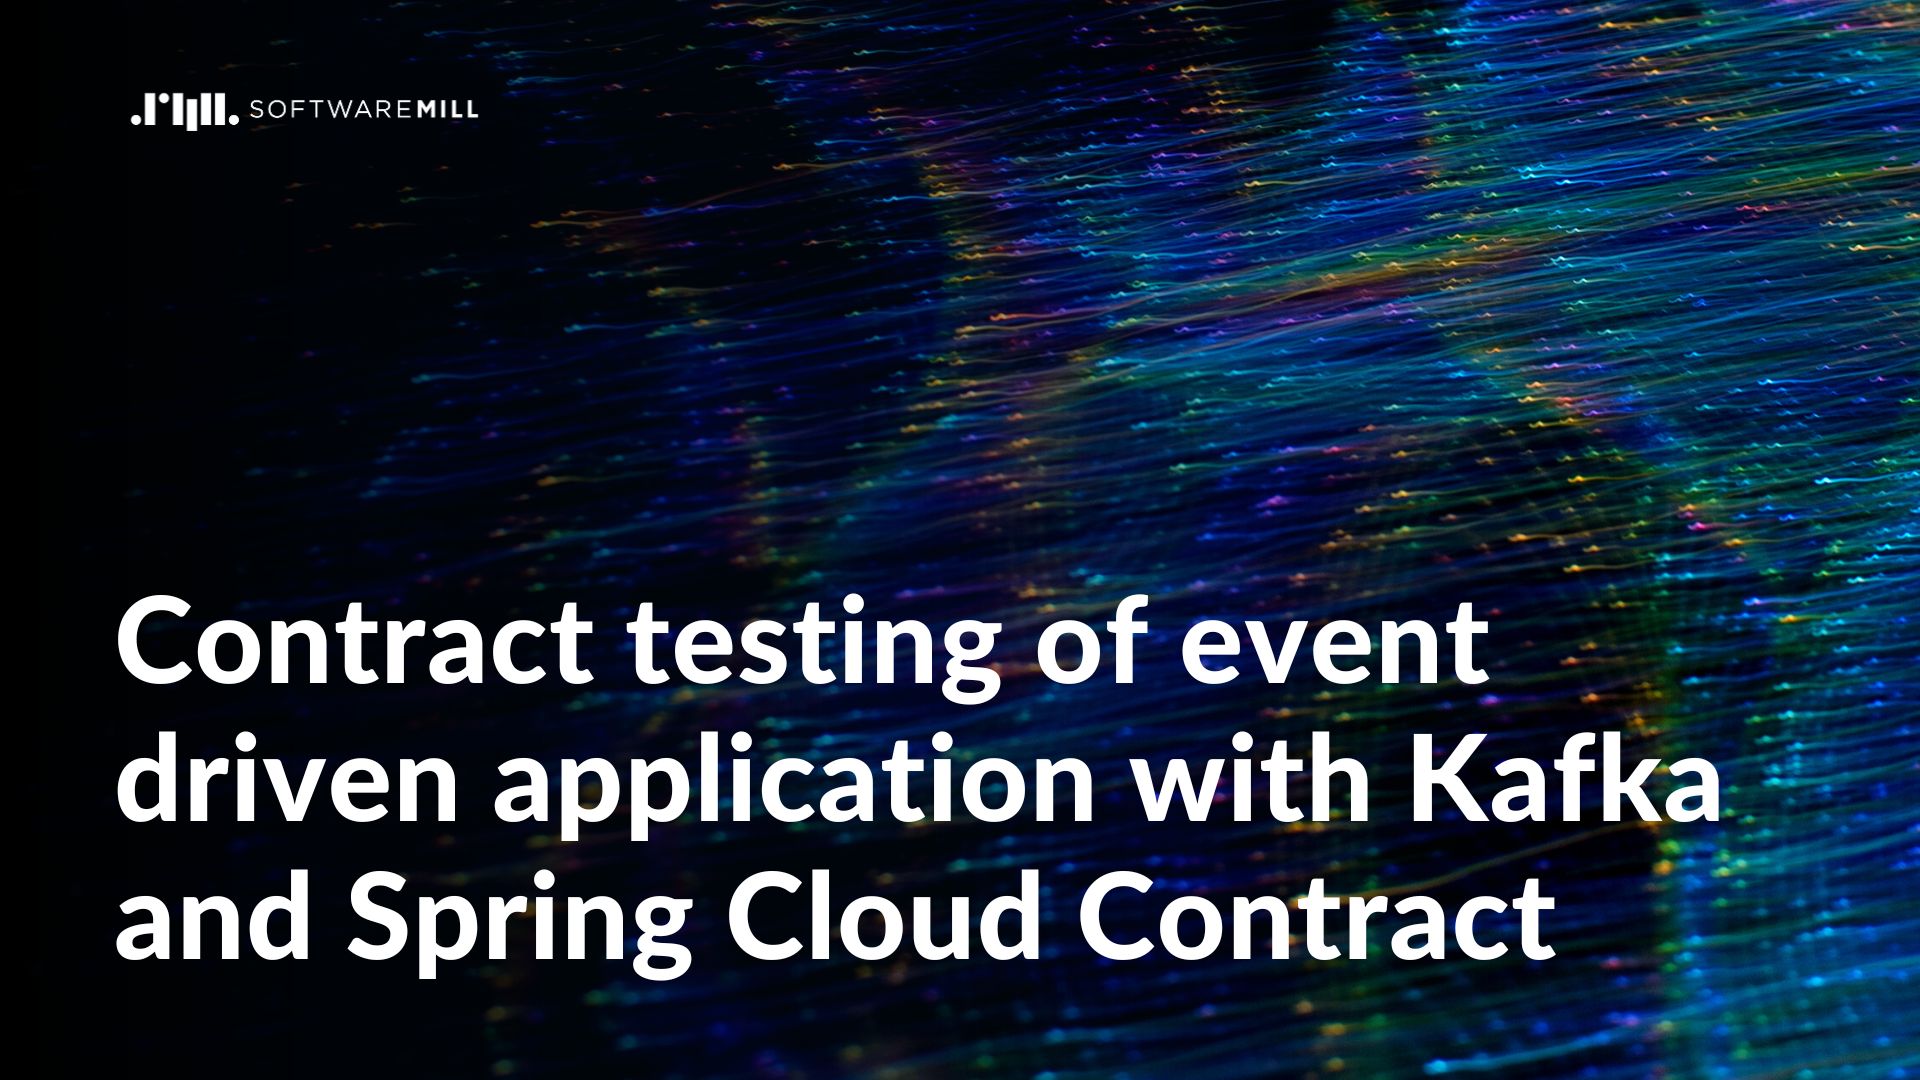 Contract testing of event driven application with Kafka and Spring Cloud Contract webp image